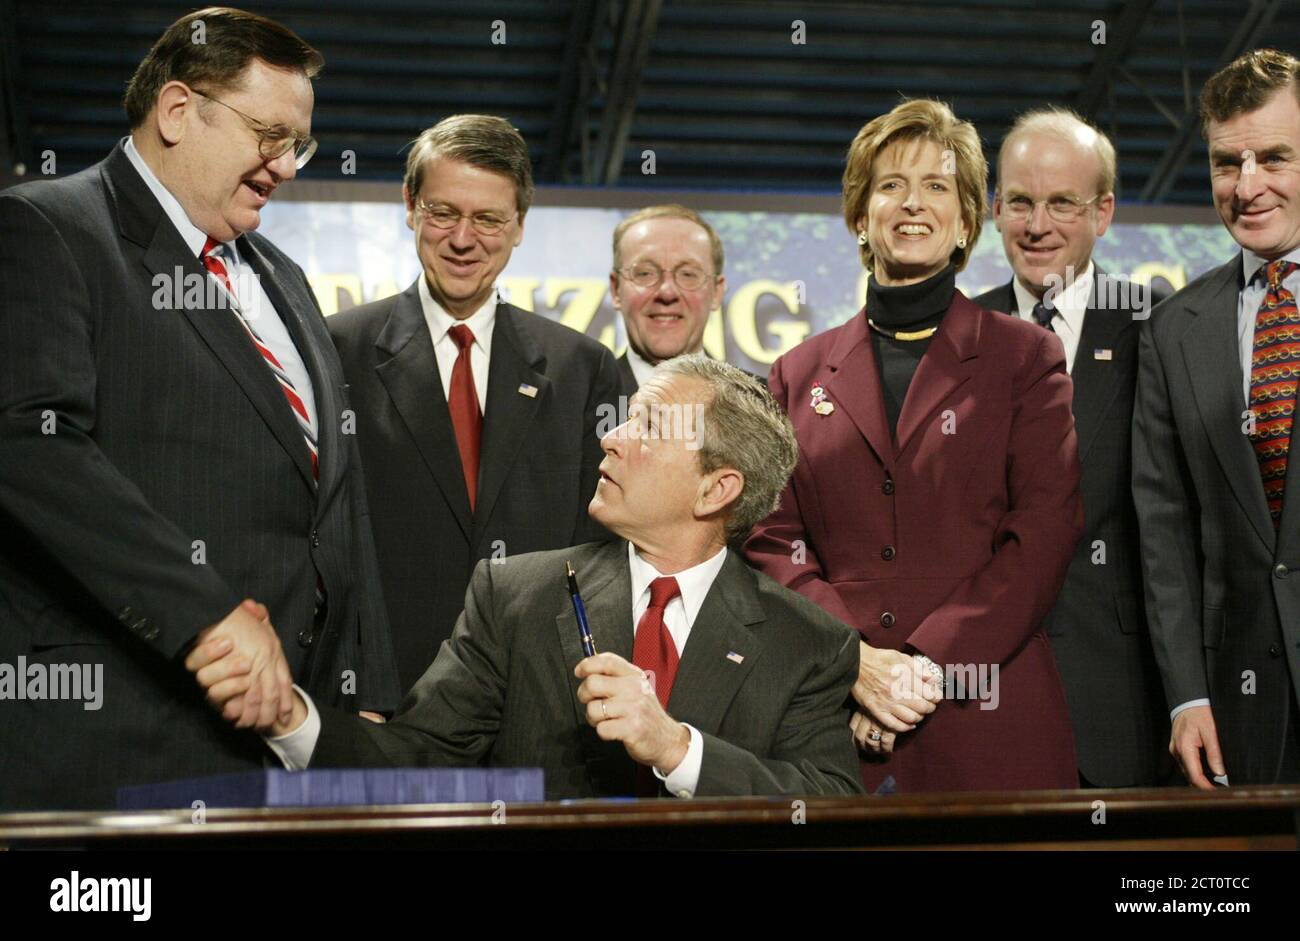 President George W. Bush shakes the hand of Rep. Paul Gillmor (R-Oh) after signing the Small Business Liability Relief and Brownfields Revitalization Act in Conshohocken, Pennsylvania, January 11, 2002. From left is Gillmor, Rep. Robert Borski (D-Pa), Pennsylvania Attorney General Mike Fisher, EPA administrator Christine Whitman, Rep. Joe Hoeffel (D-Pa) and Pennsylvania Governor Mark Schweiker. REUTERS/Kevin Lamarque  KL/HB Stock Photo